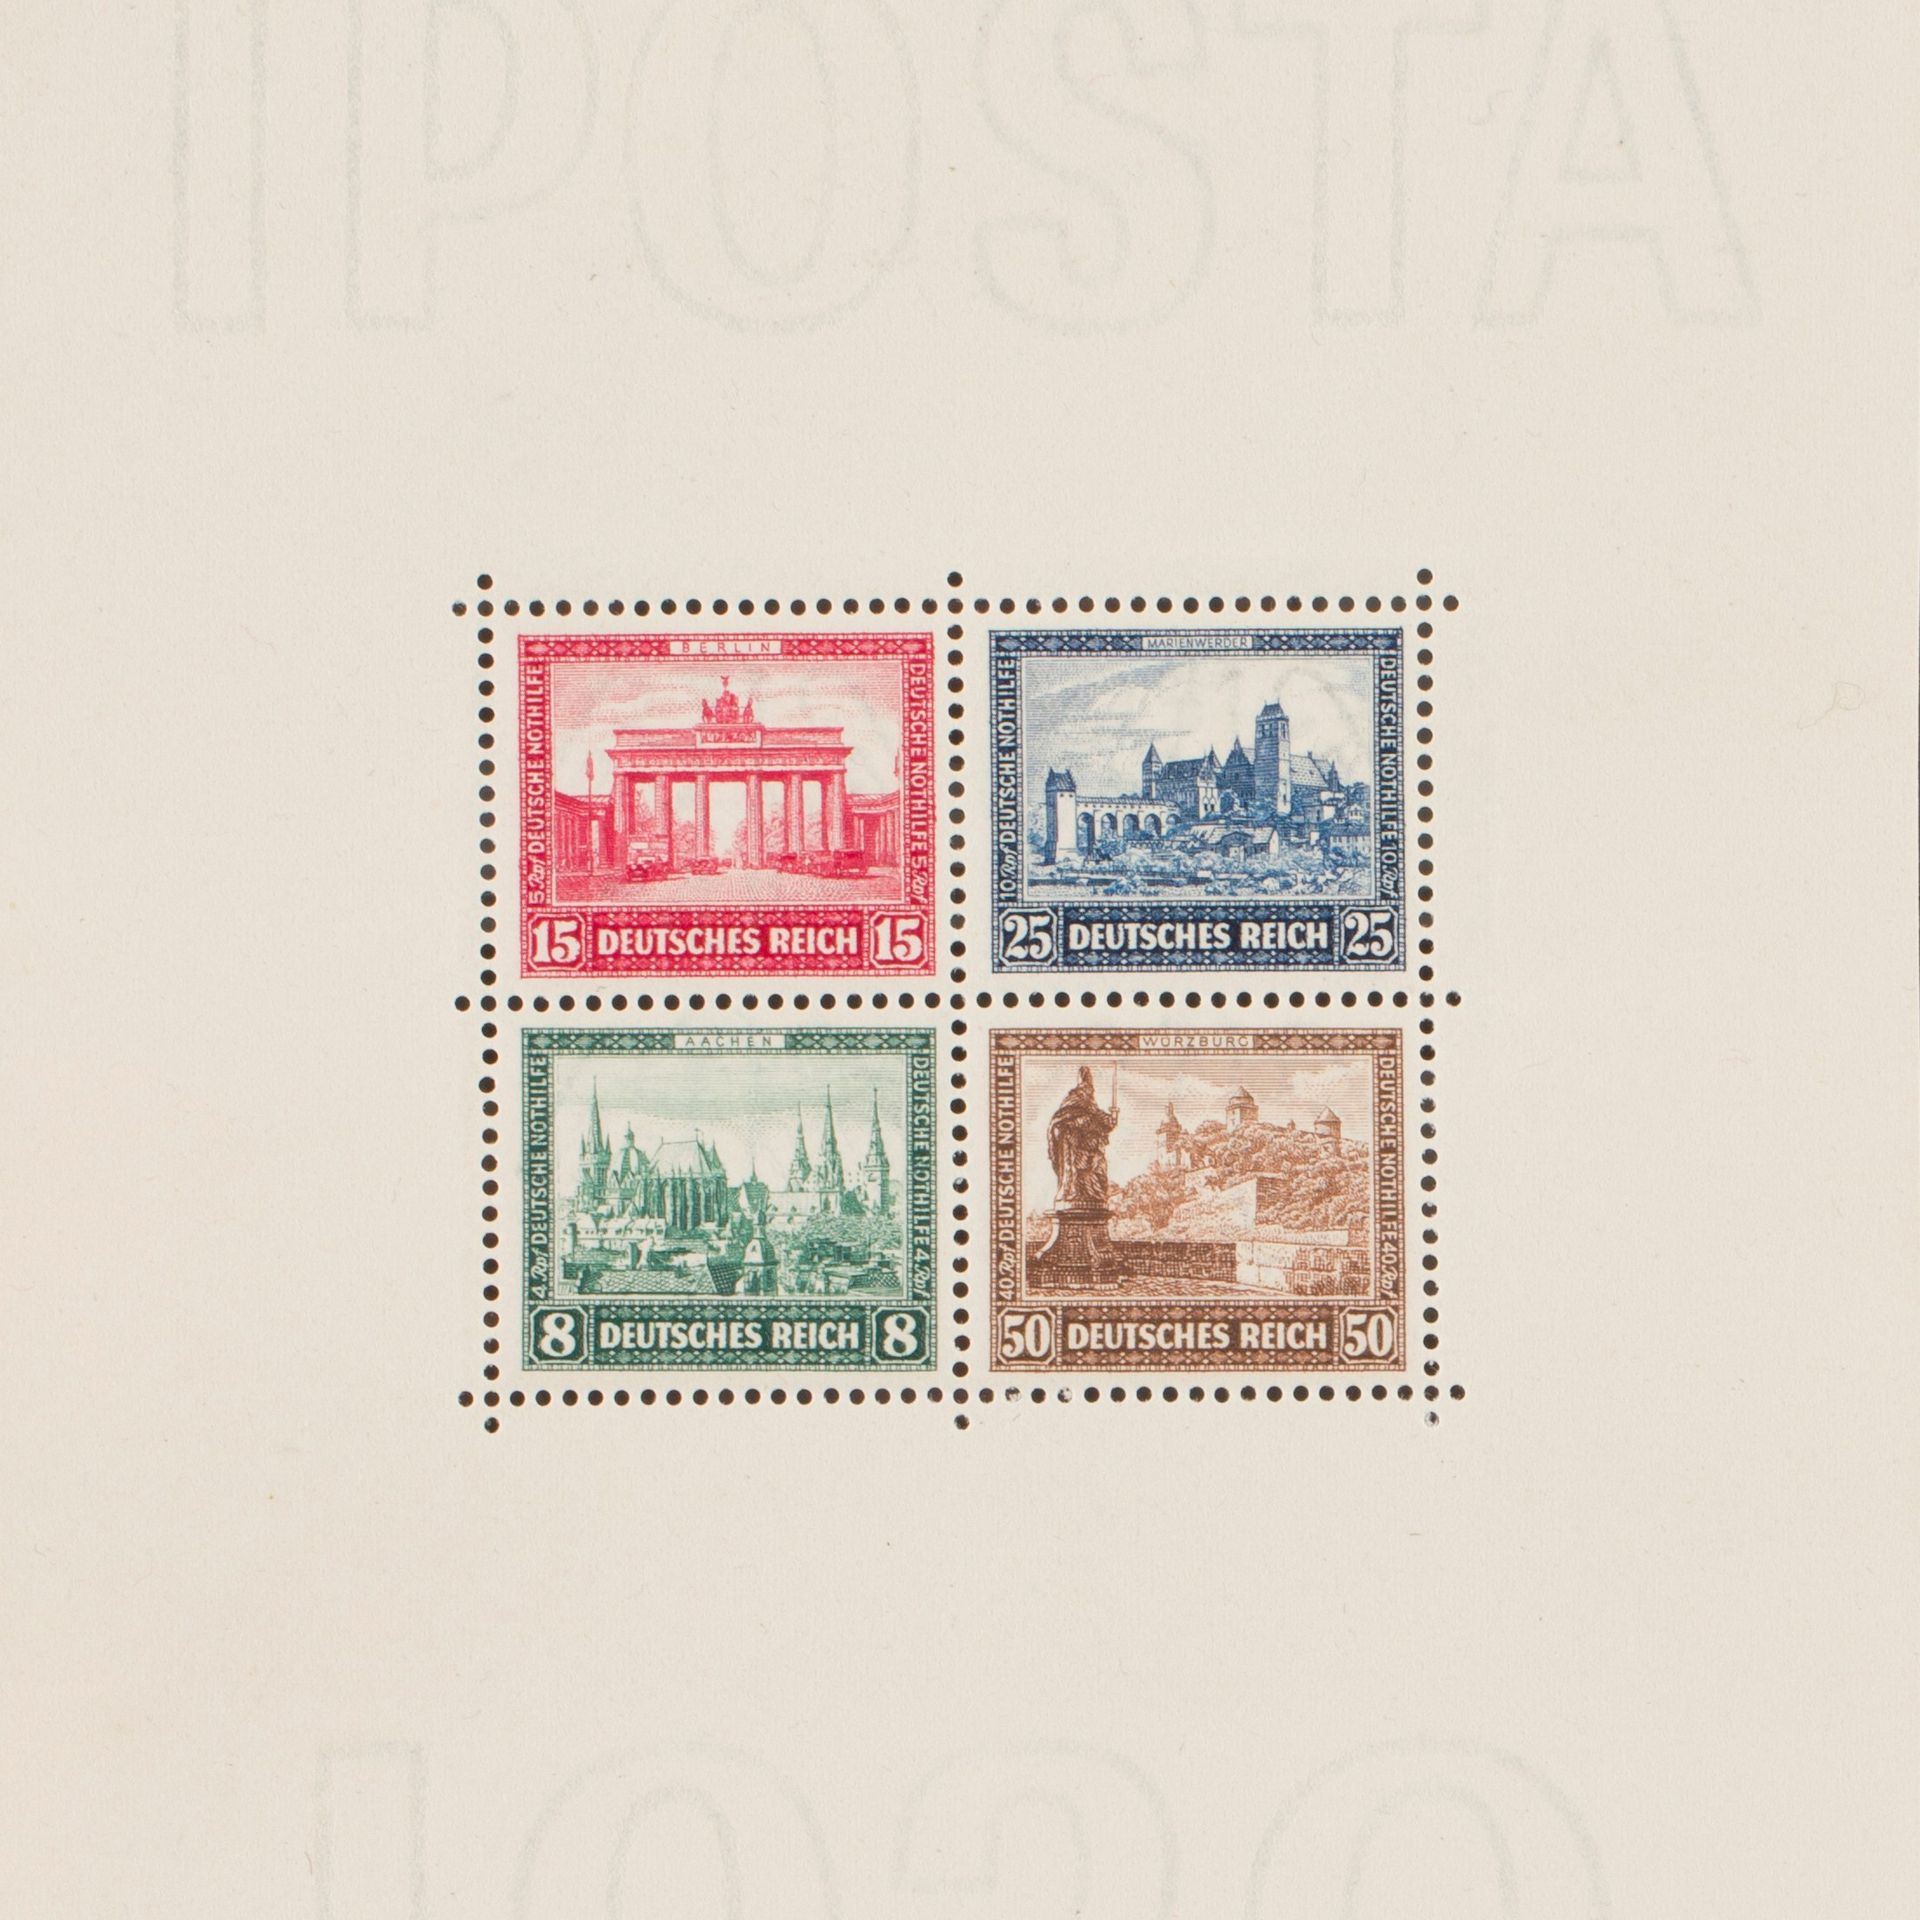 Null [GERMANY]
Superb Block #1 from Germany "IPOSTA 1930" mint ** luxury.